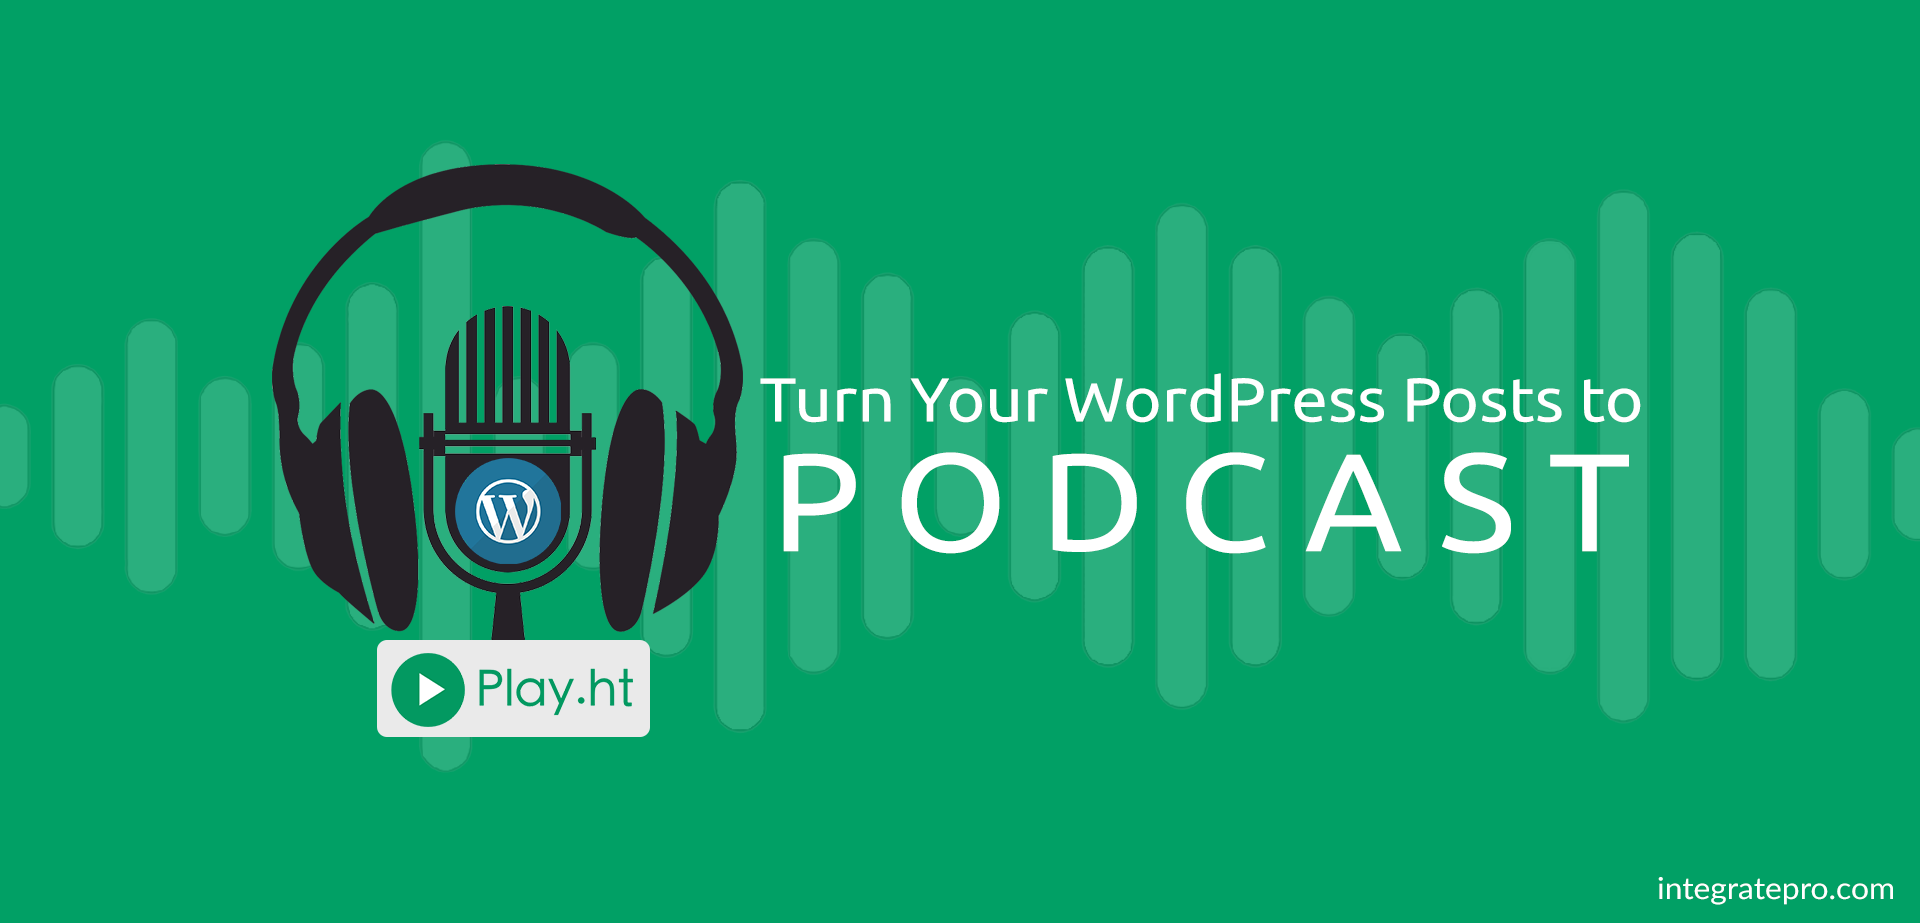 Play - Turn Your WordPress Posts to Podcasts